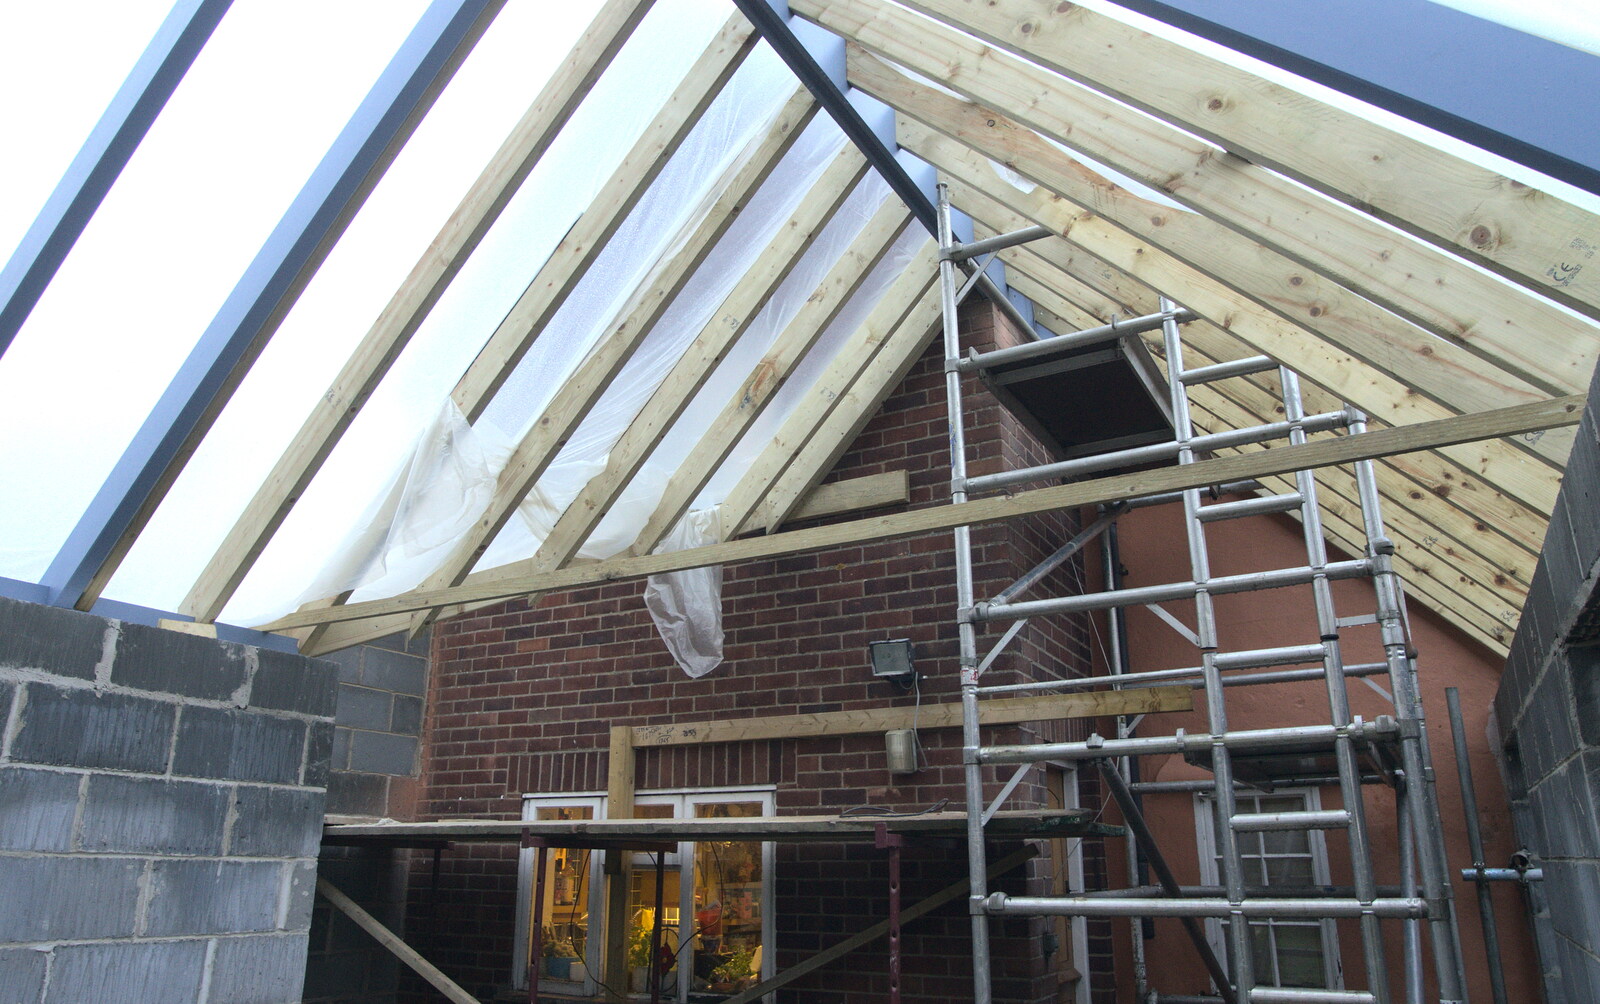 A November Miscellany and Building Progress, Thornham and Brome, Suffolk - 17th November 2013: The back room has a polythene roof